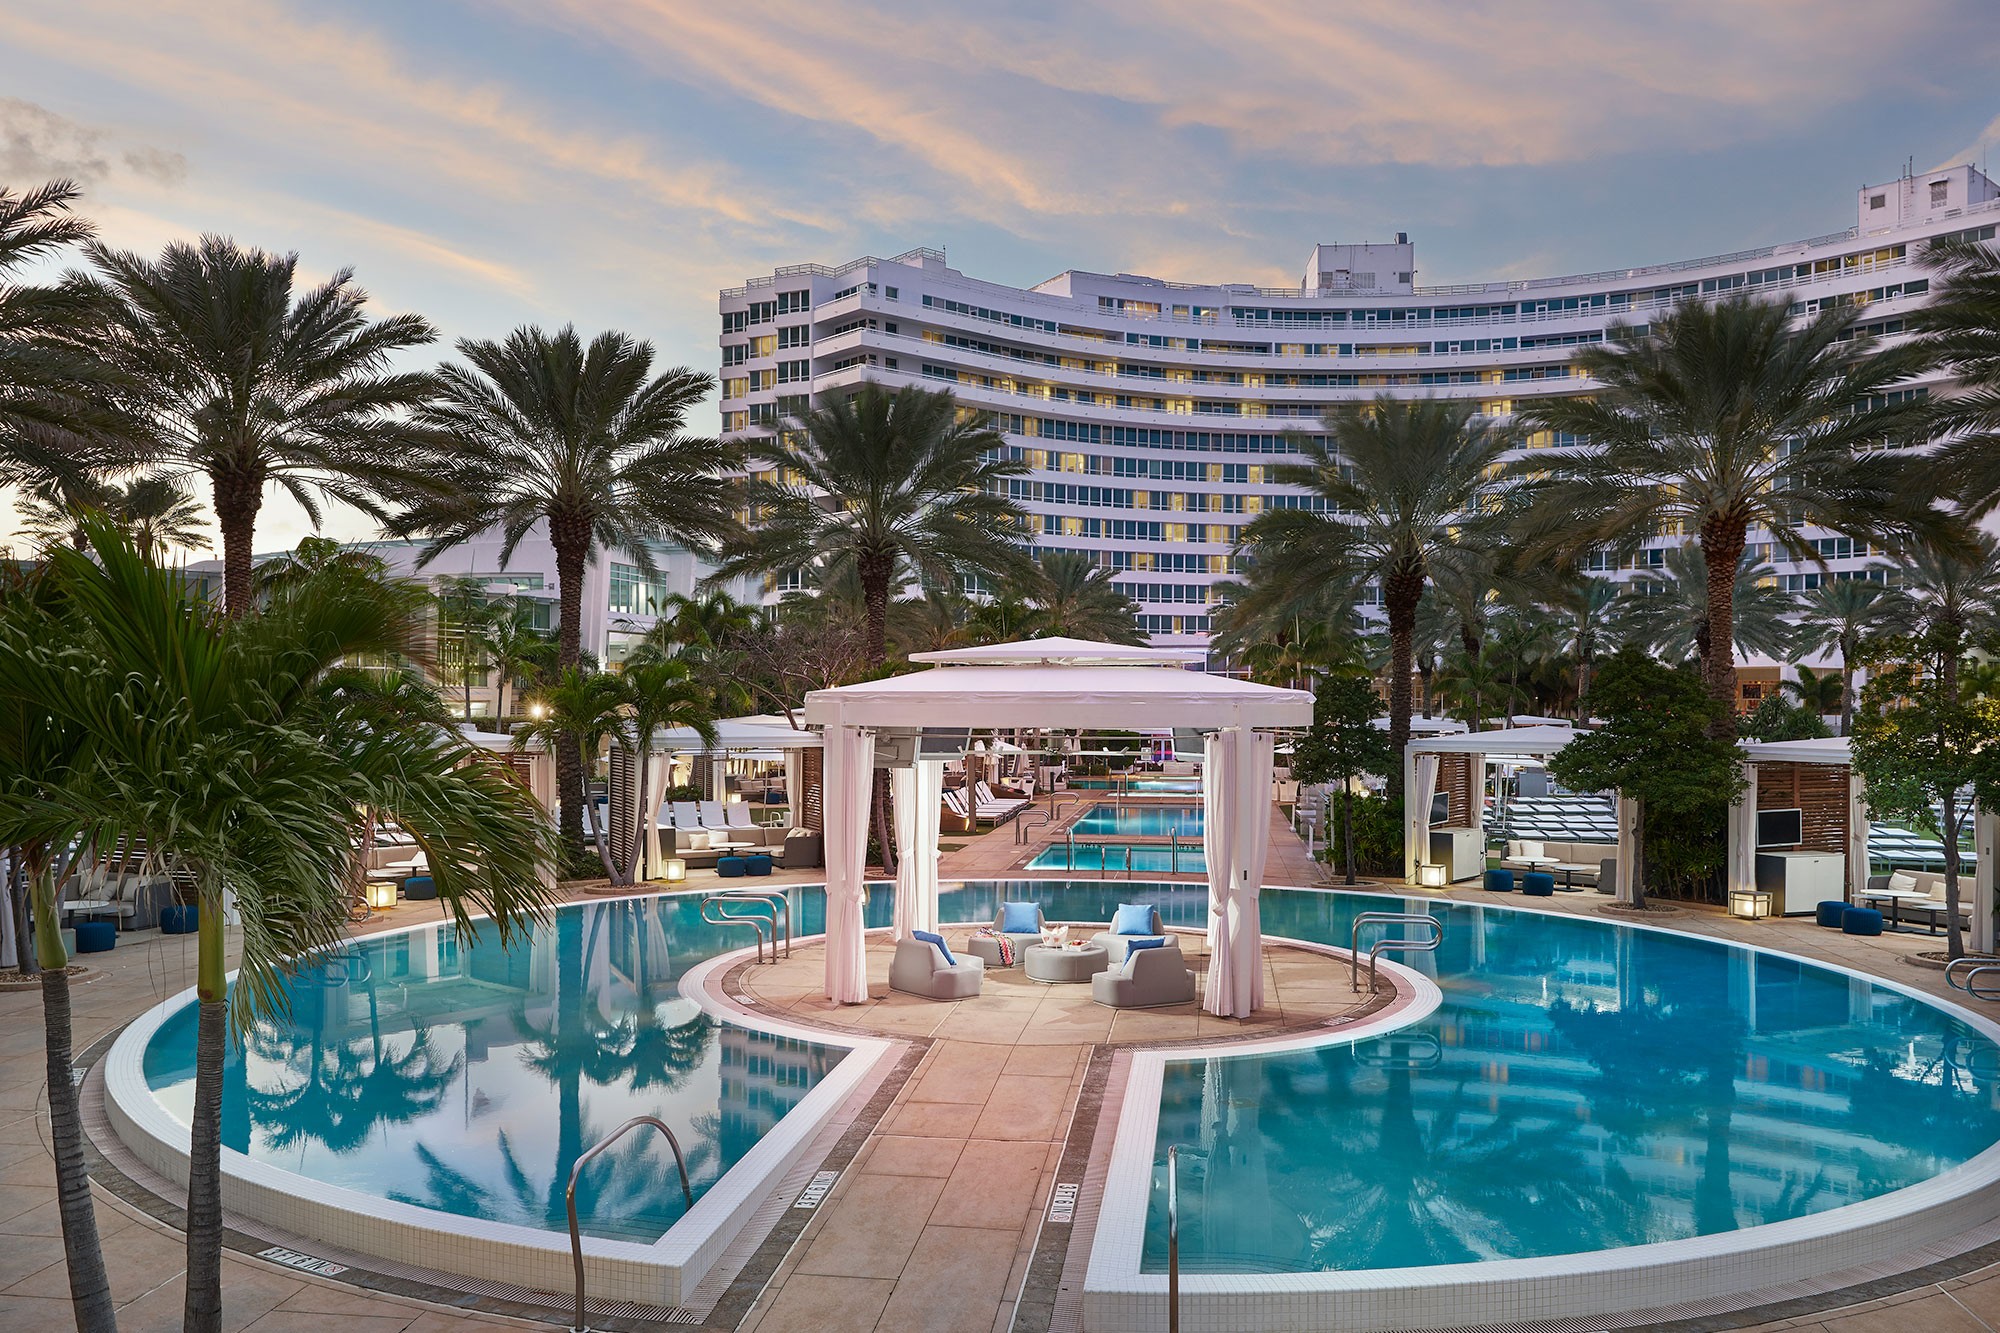 External view of the cabana area at the Fontainebleau Miami Beach.